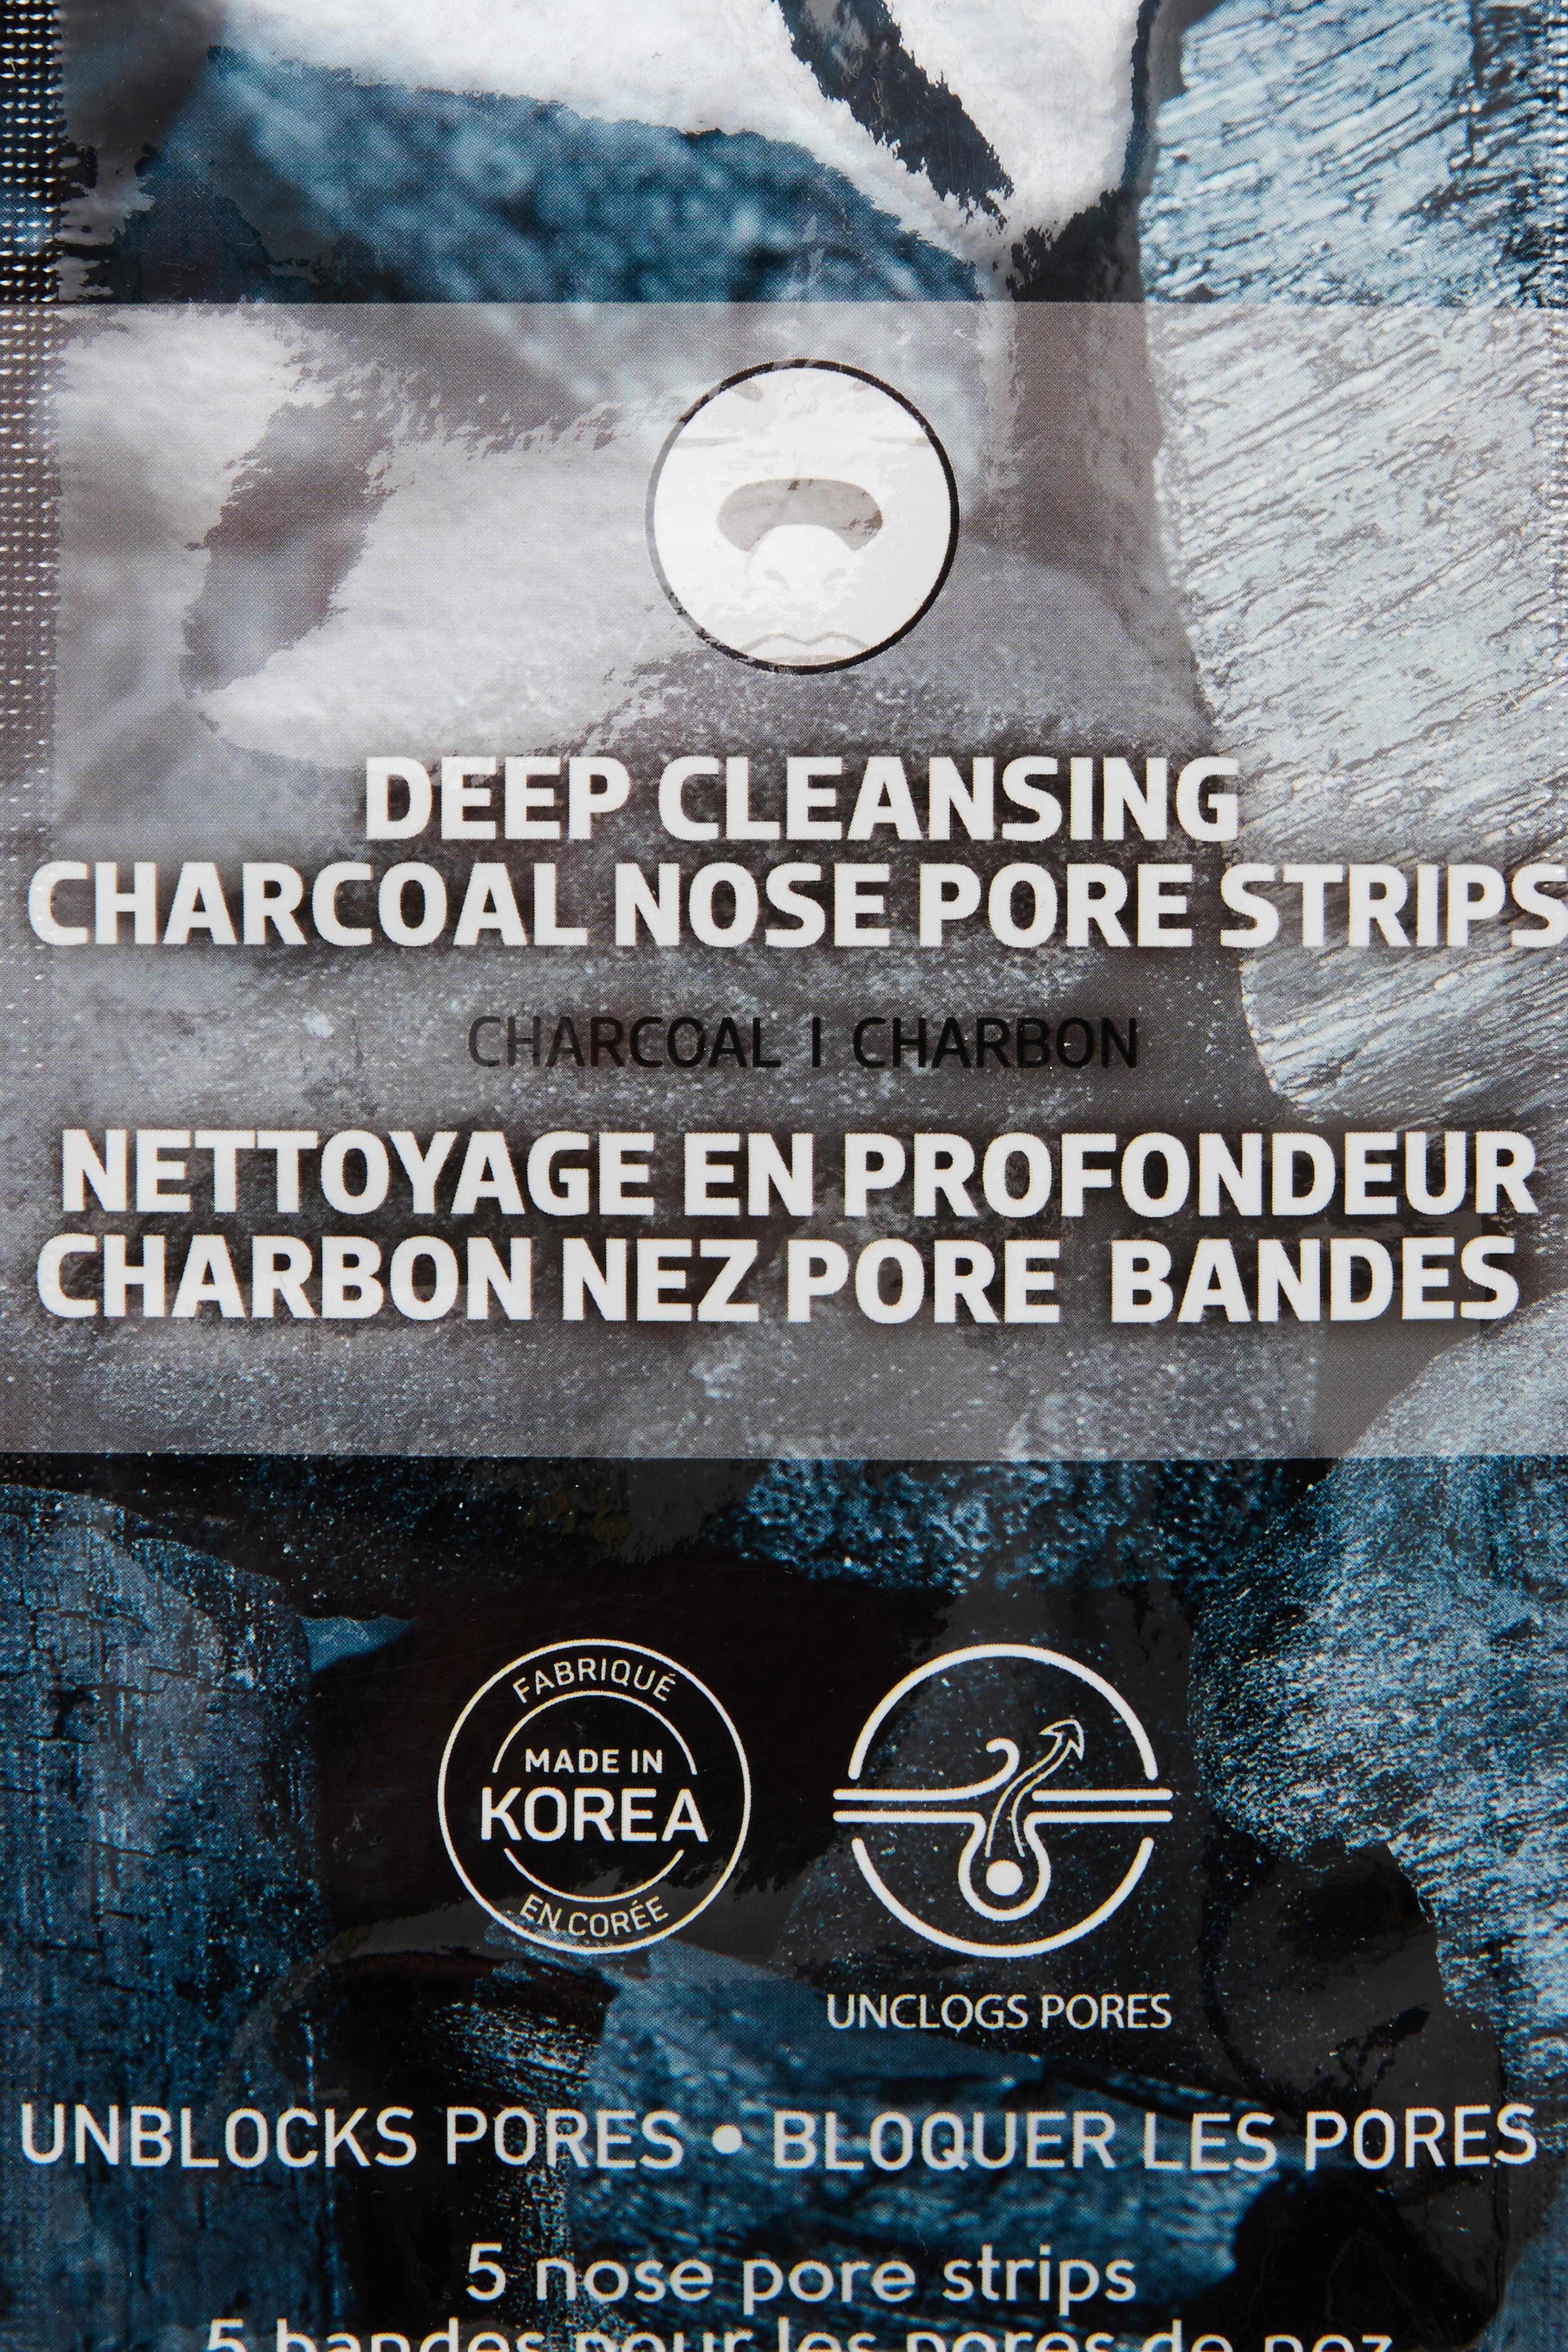 PS Charcoal Nose Pore Strips